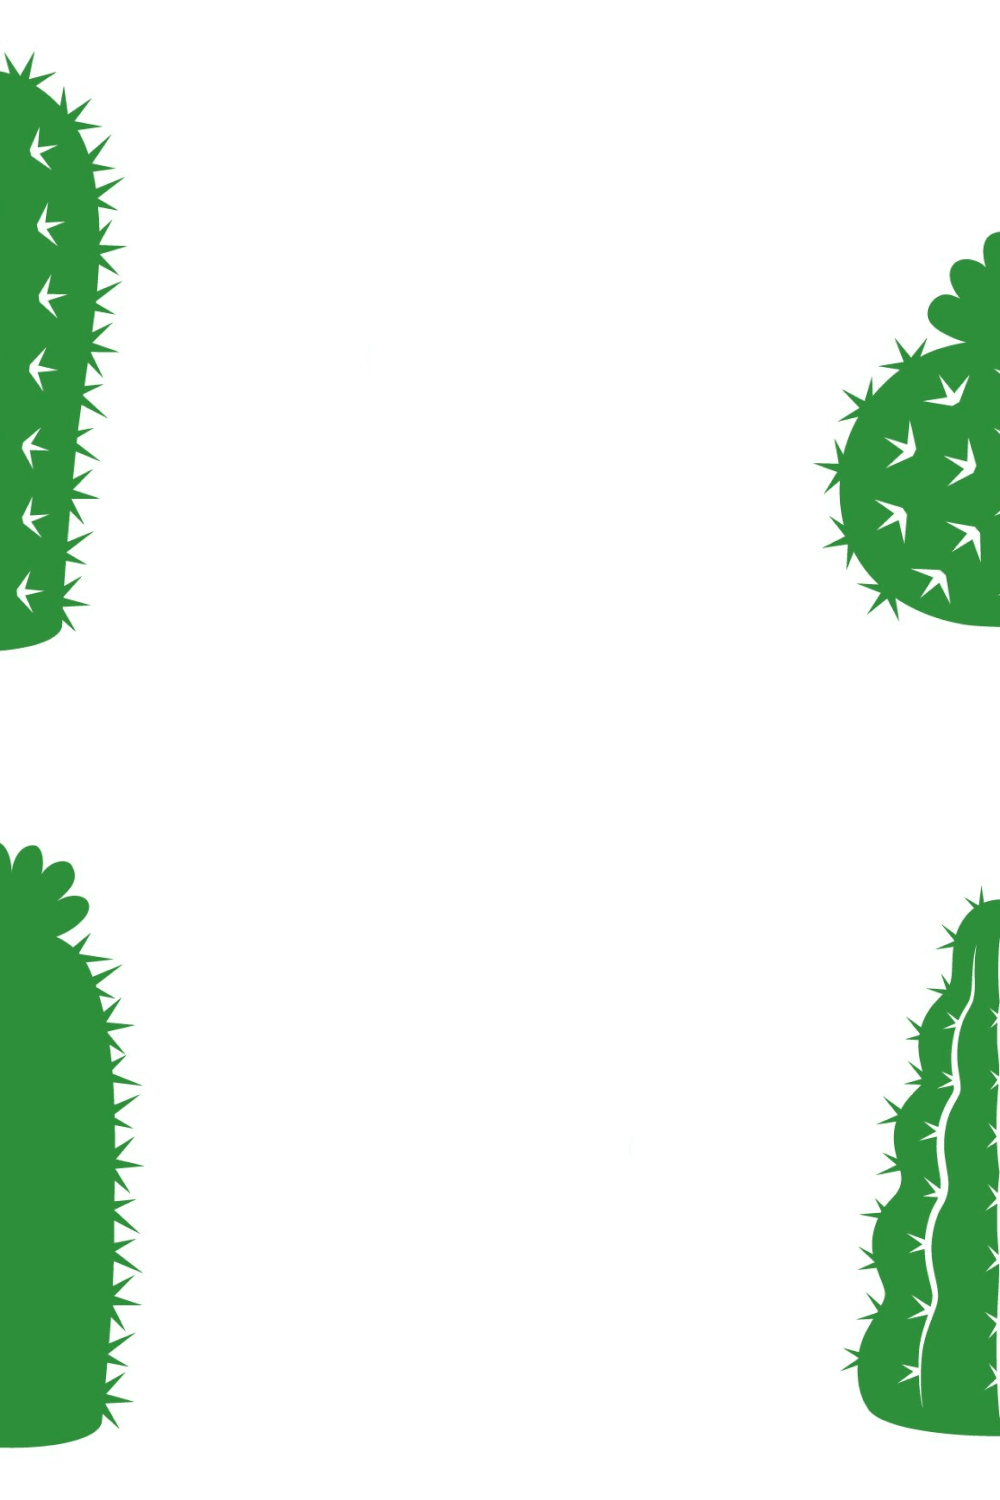 Green Parts of Cactuses.